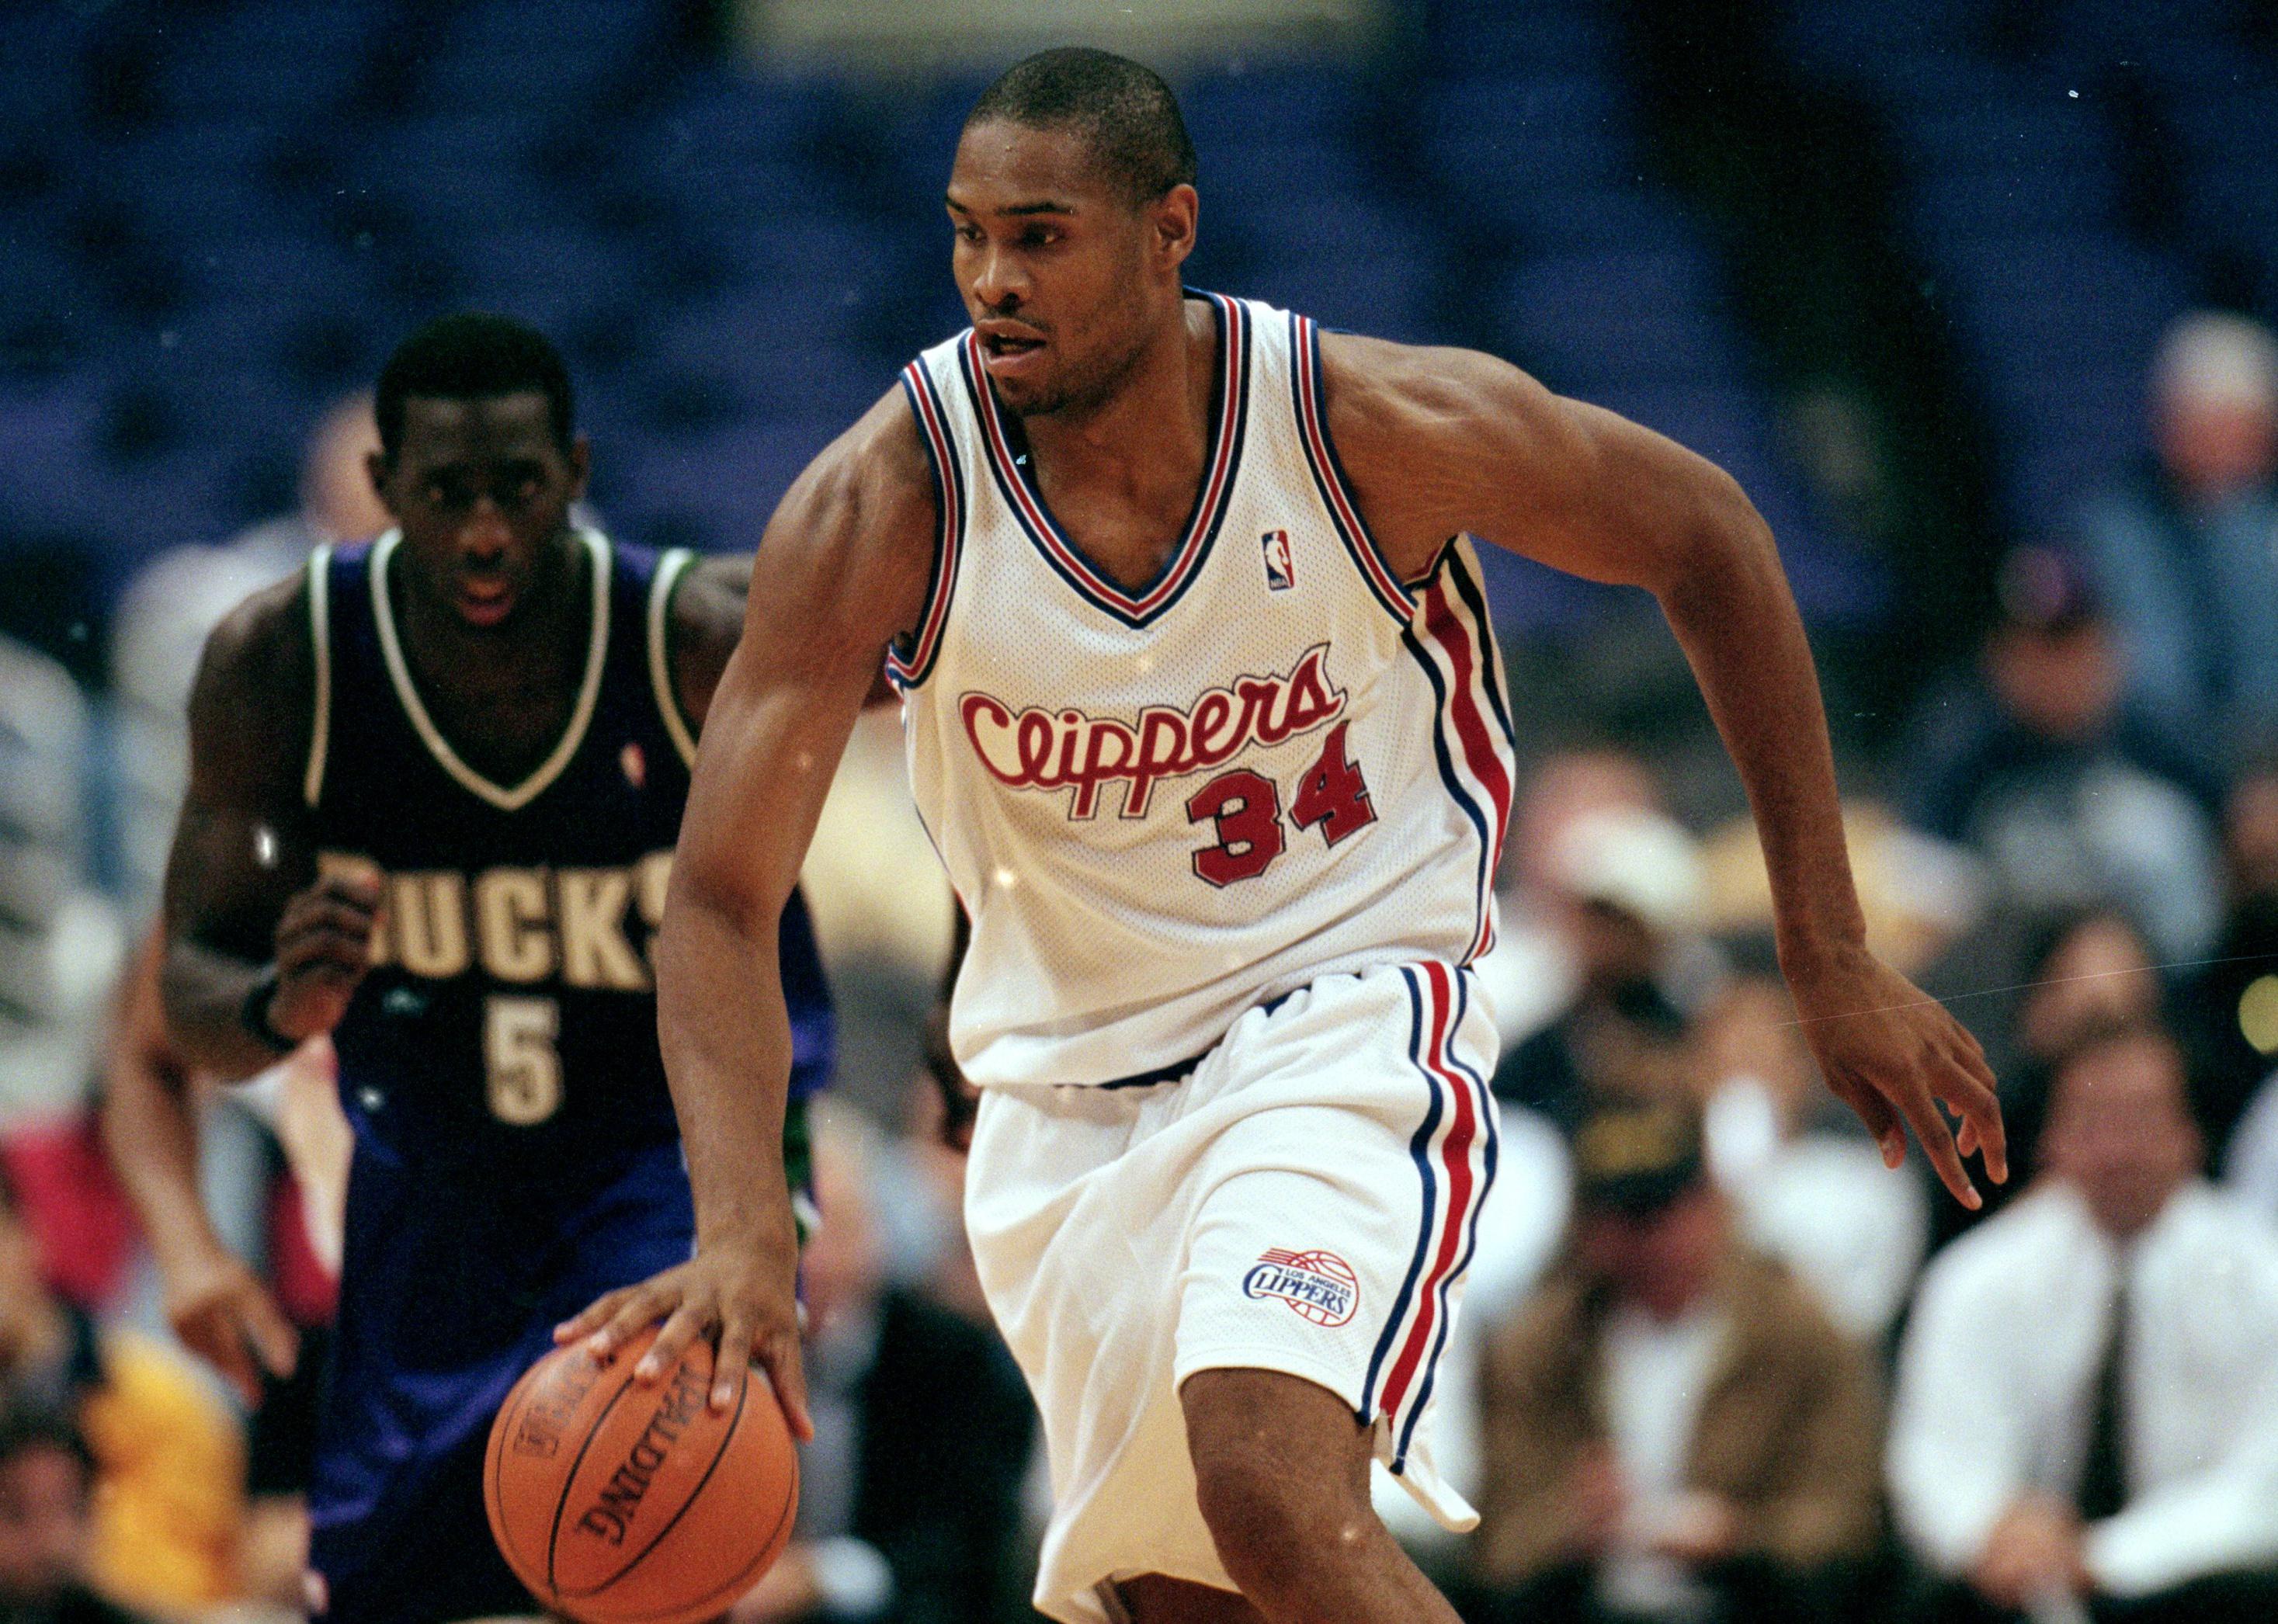 Michael Olowokandi dribbles the ball during a game at the Staples Center.